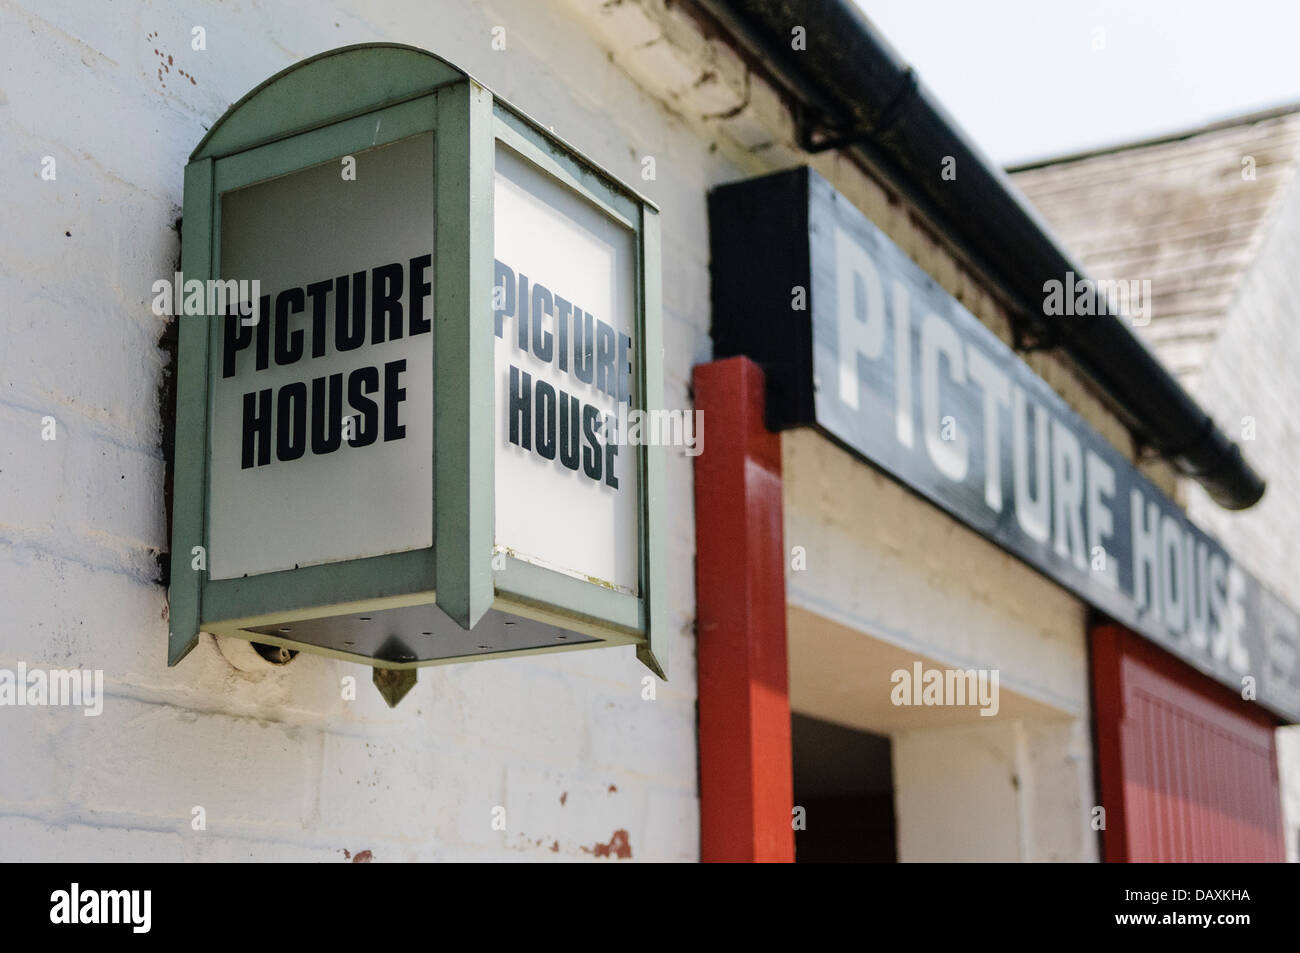 Old fashioned Picture House signs Stock Photo